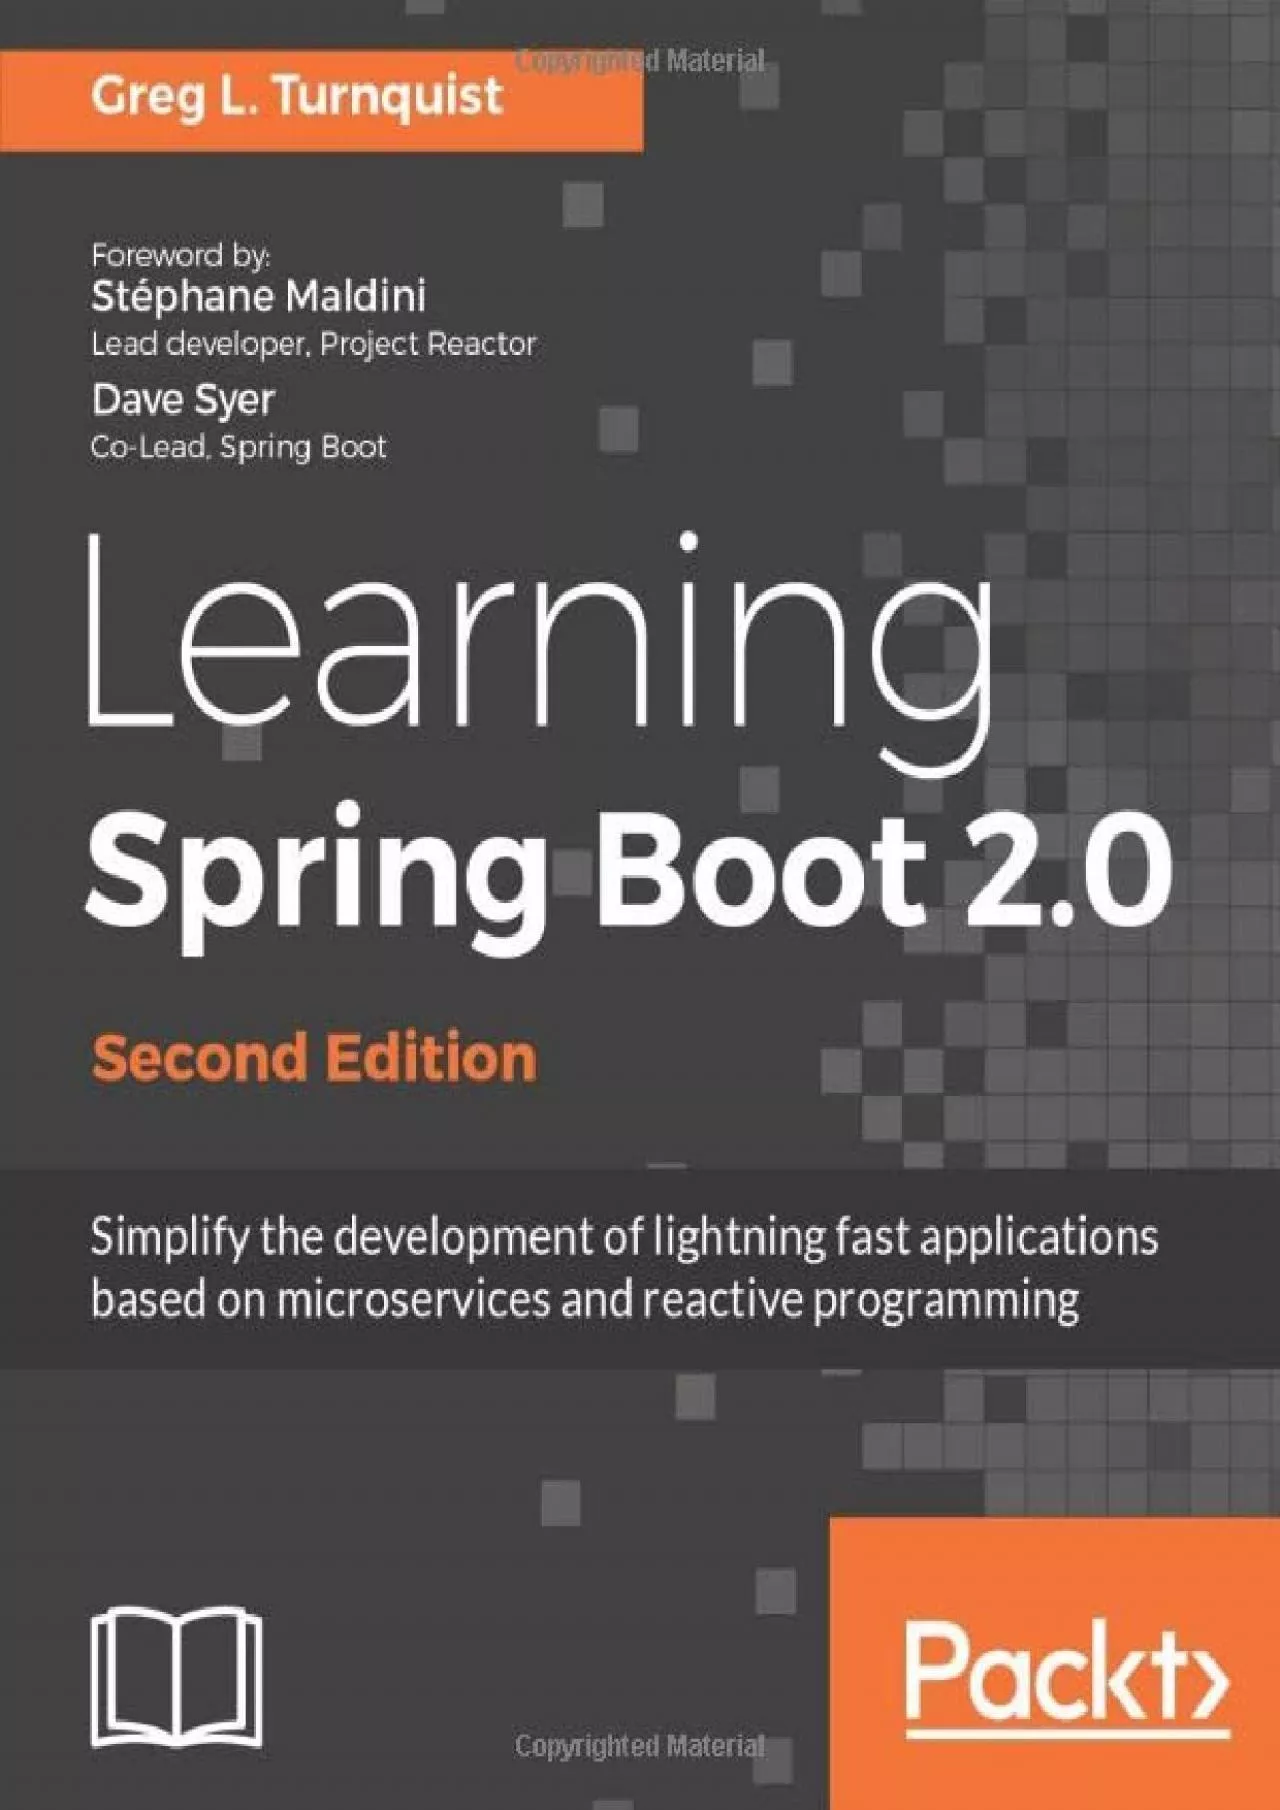 [DOWLOAD]-Learning Spring Boot 2.0 - Second Edition: Simplify the development of lightning